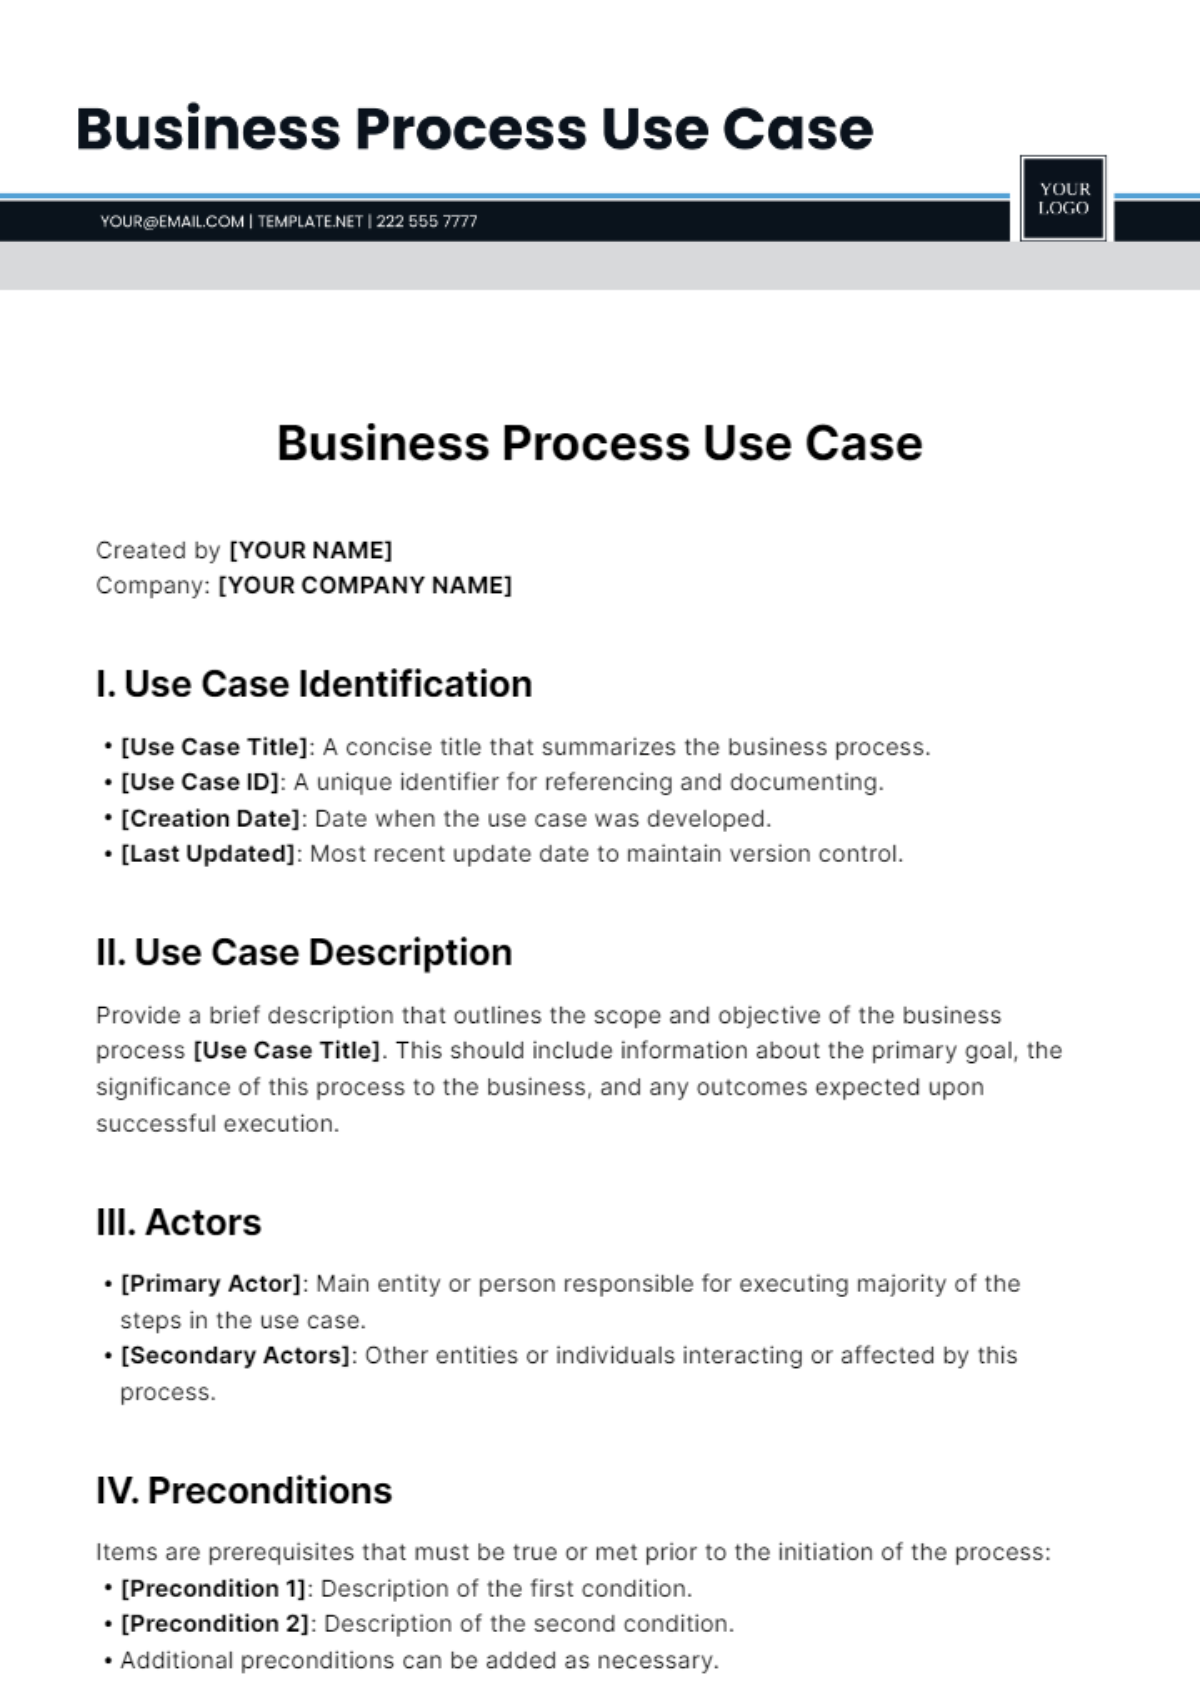 Business Process Use Case Template